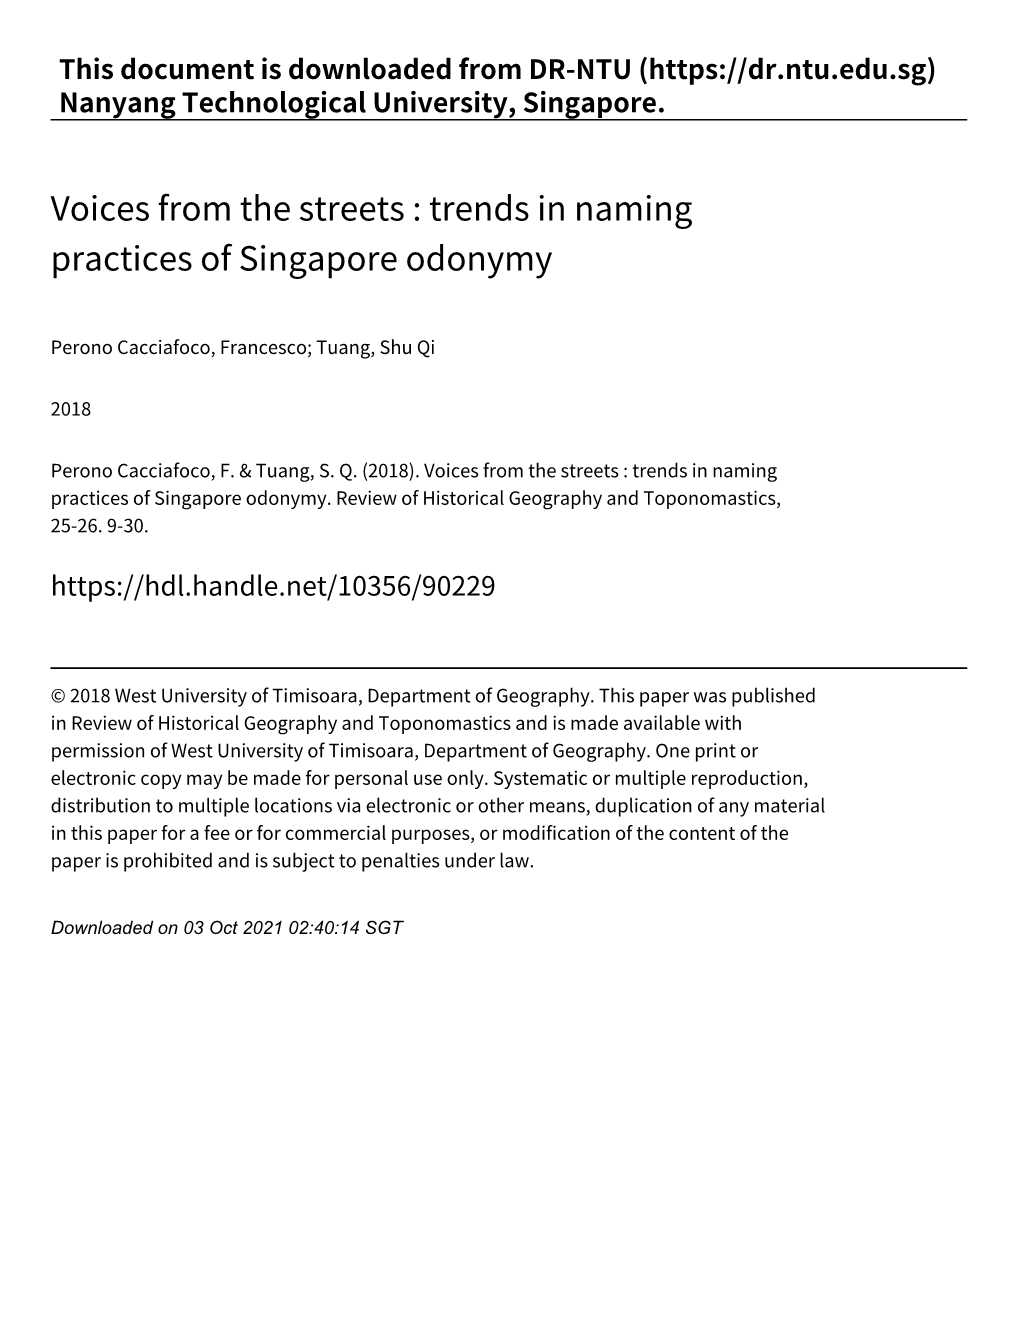 Voices from the Streets : Trends in Naming Practices of Singapore Odonymy